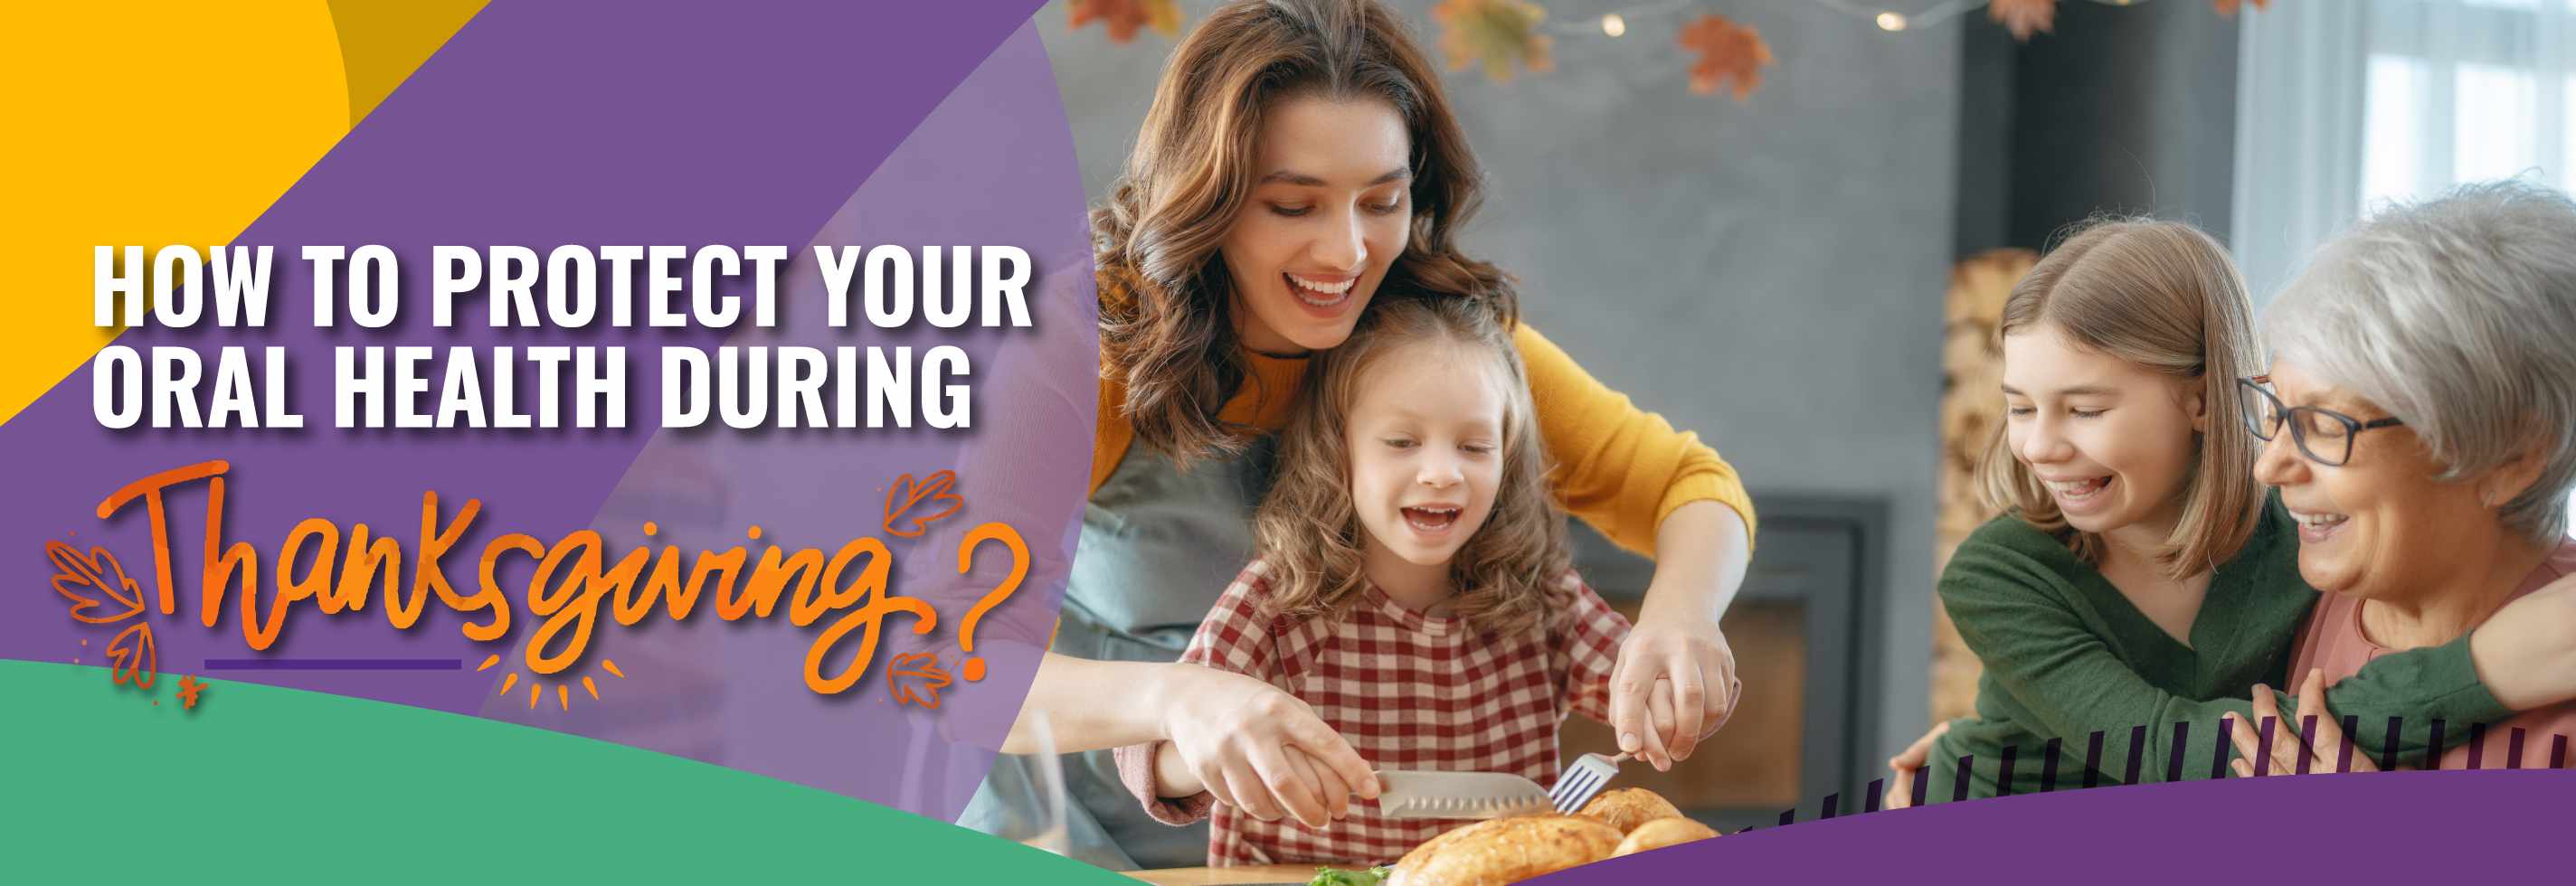 How to Protect Your Oral Health during Thanksgiving?